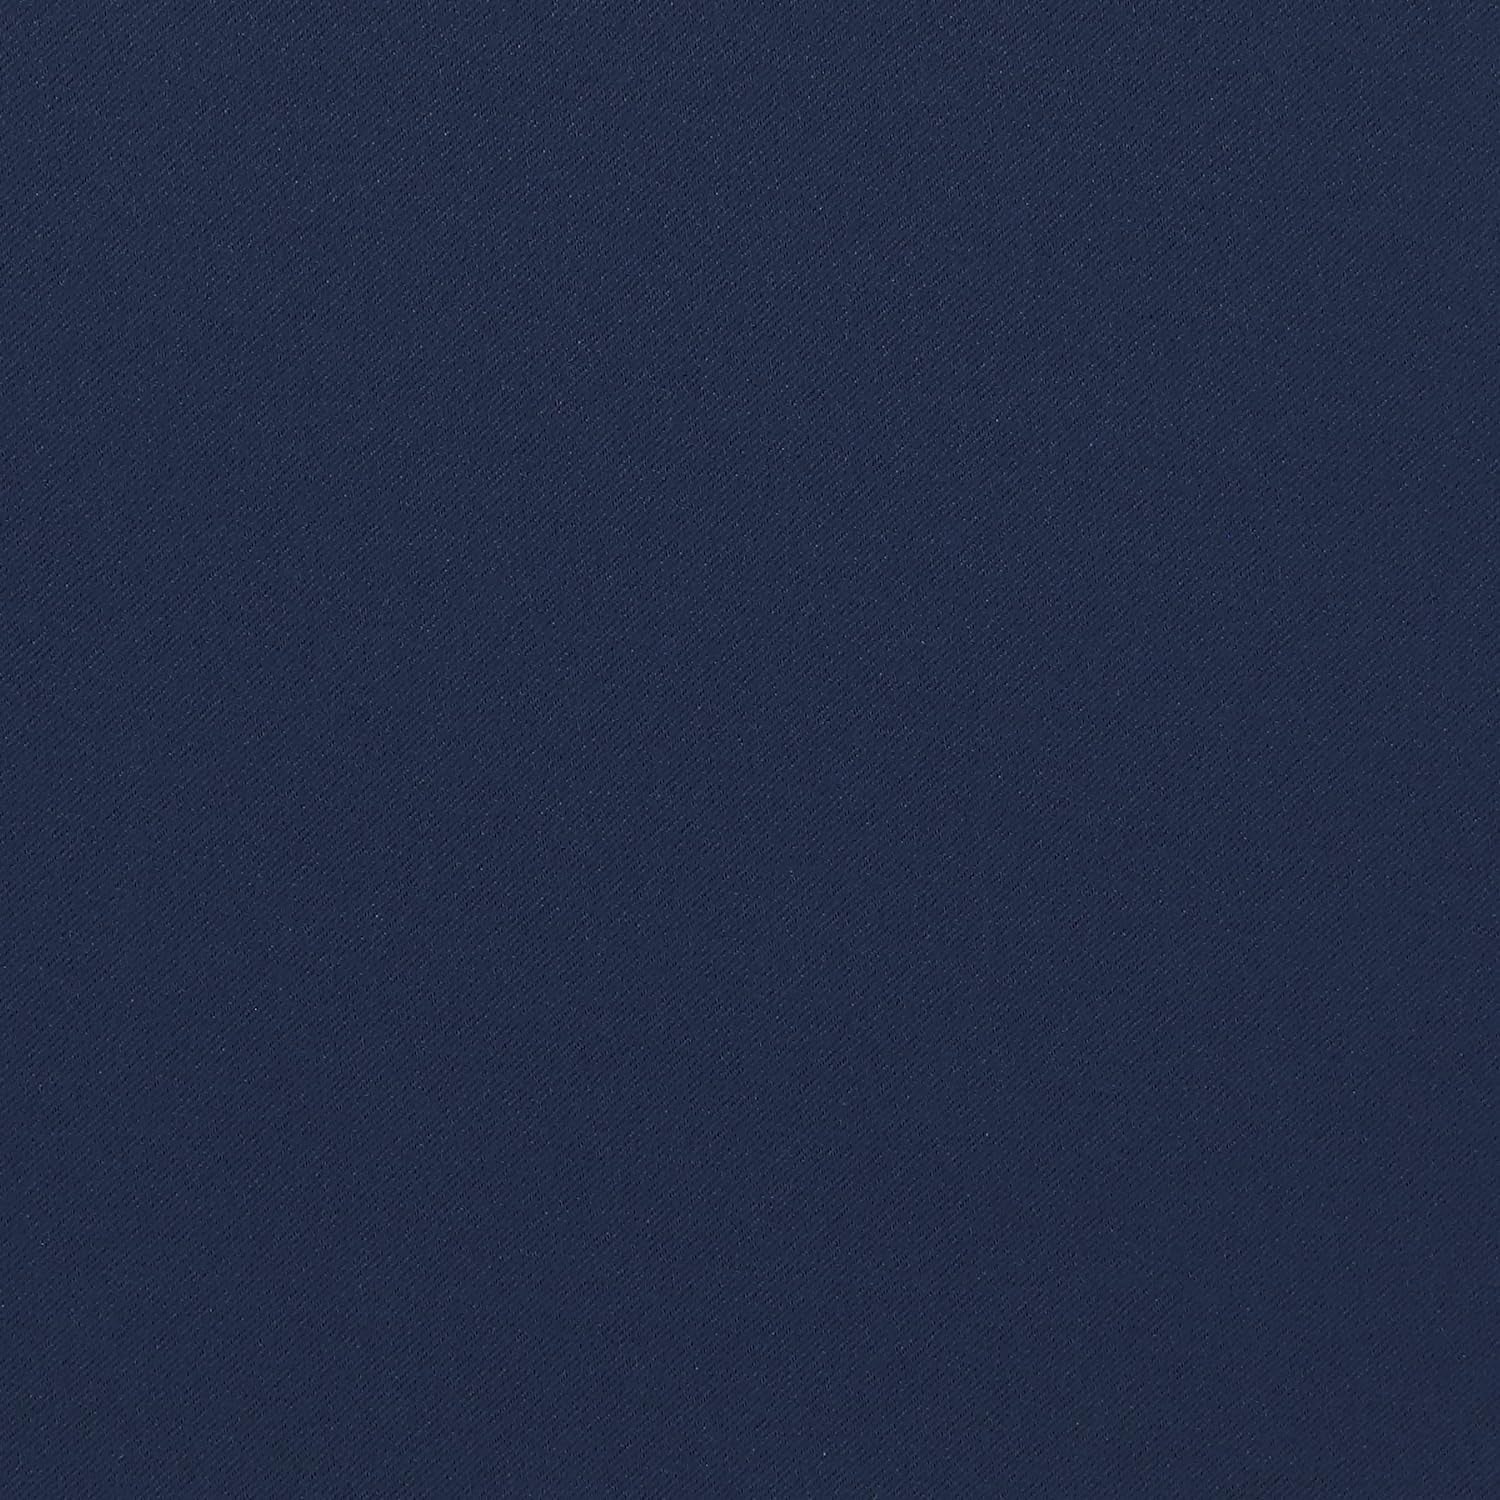 ECLIPSE Andover Solid Tripleweave Thermal Blackout Grommet Curtains for Bedroom (2 Panels), 42 in X 108 In, Navy  Keeco LLC   